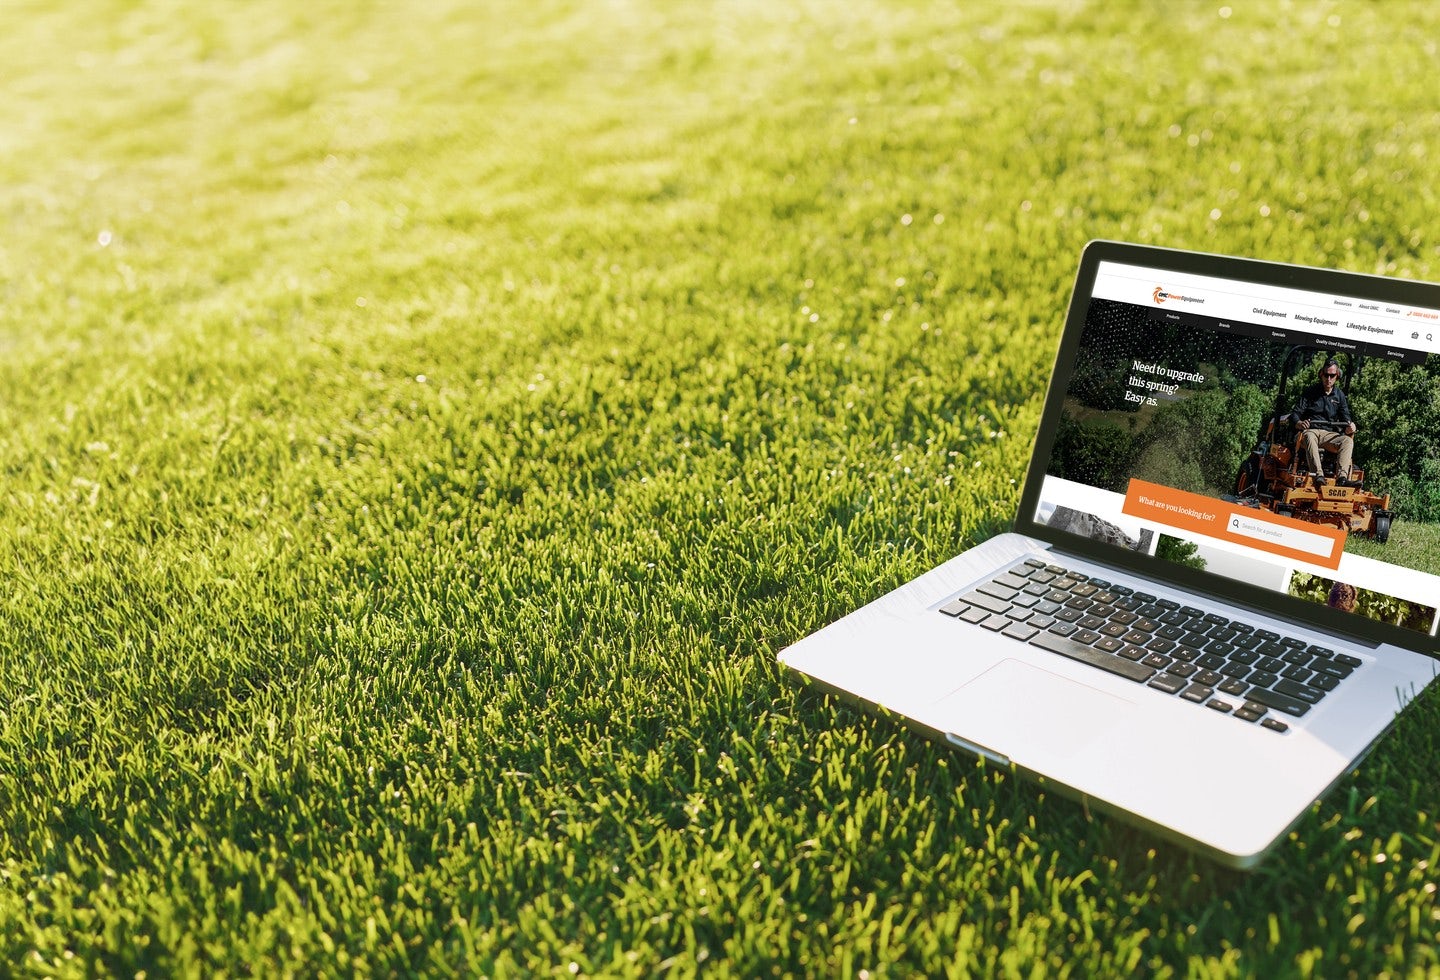 Laptop on lawn with OMC website visual